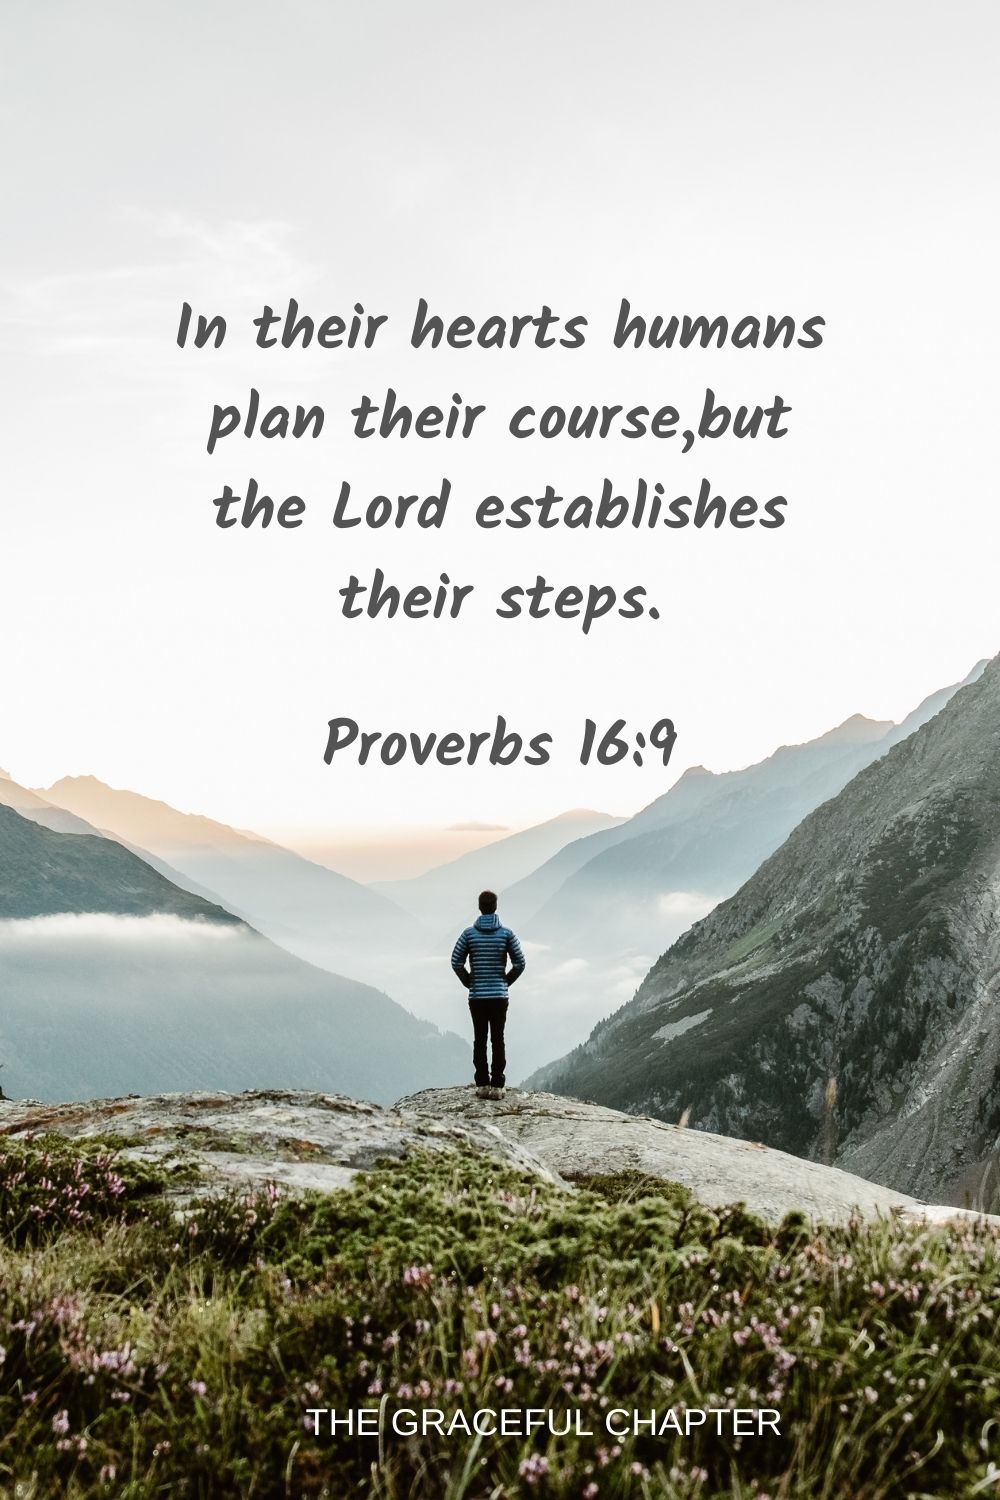 In their hearts humans plan their course,but the Lord establishes their steps. Proverbs 16:9